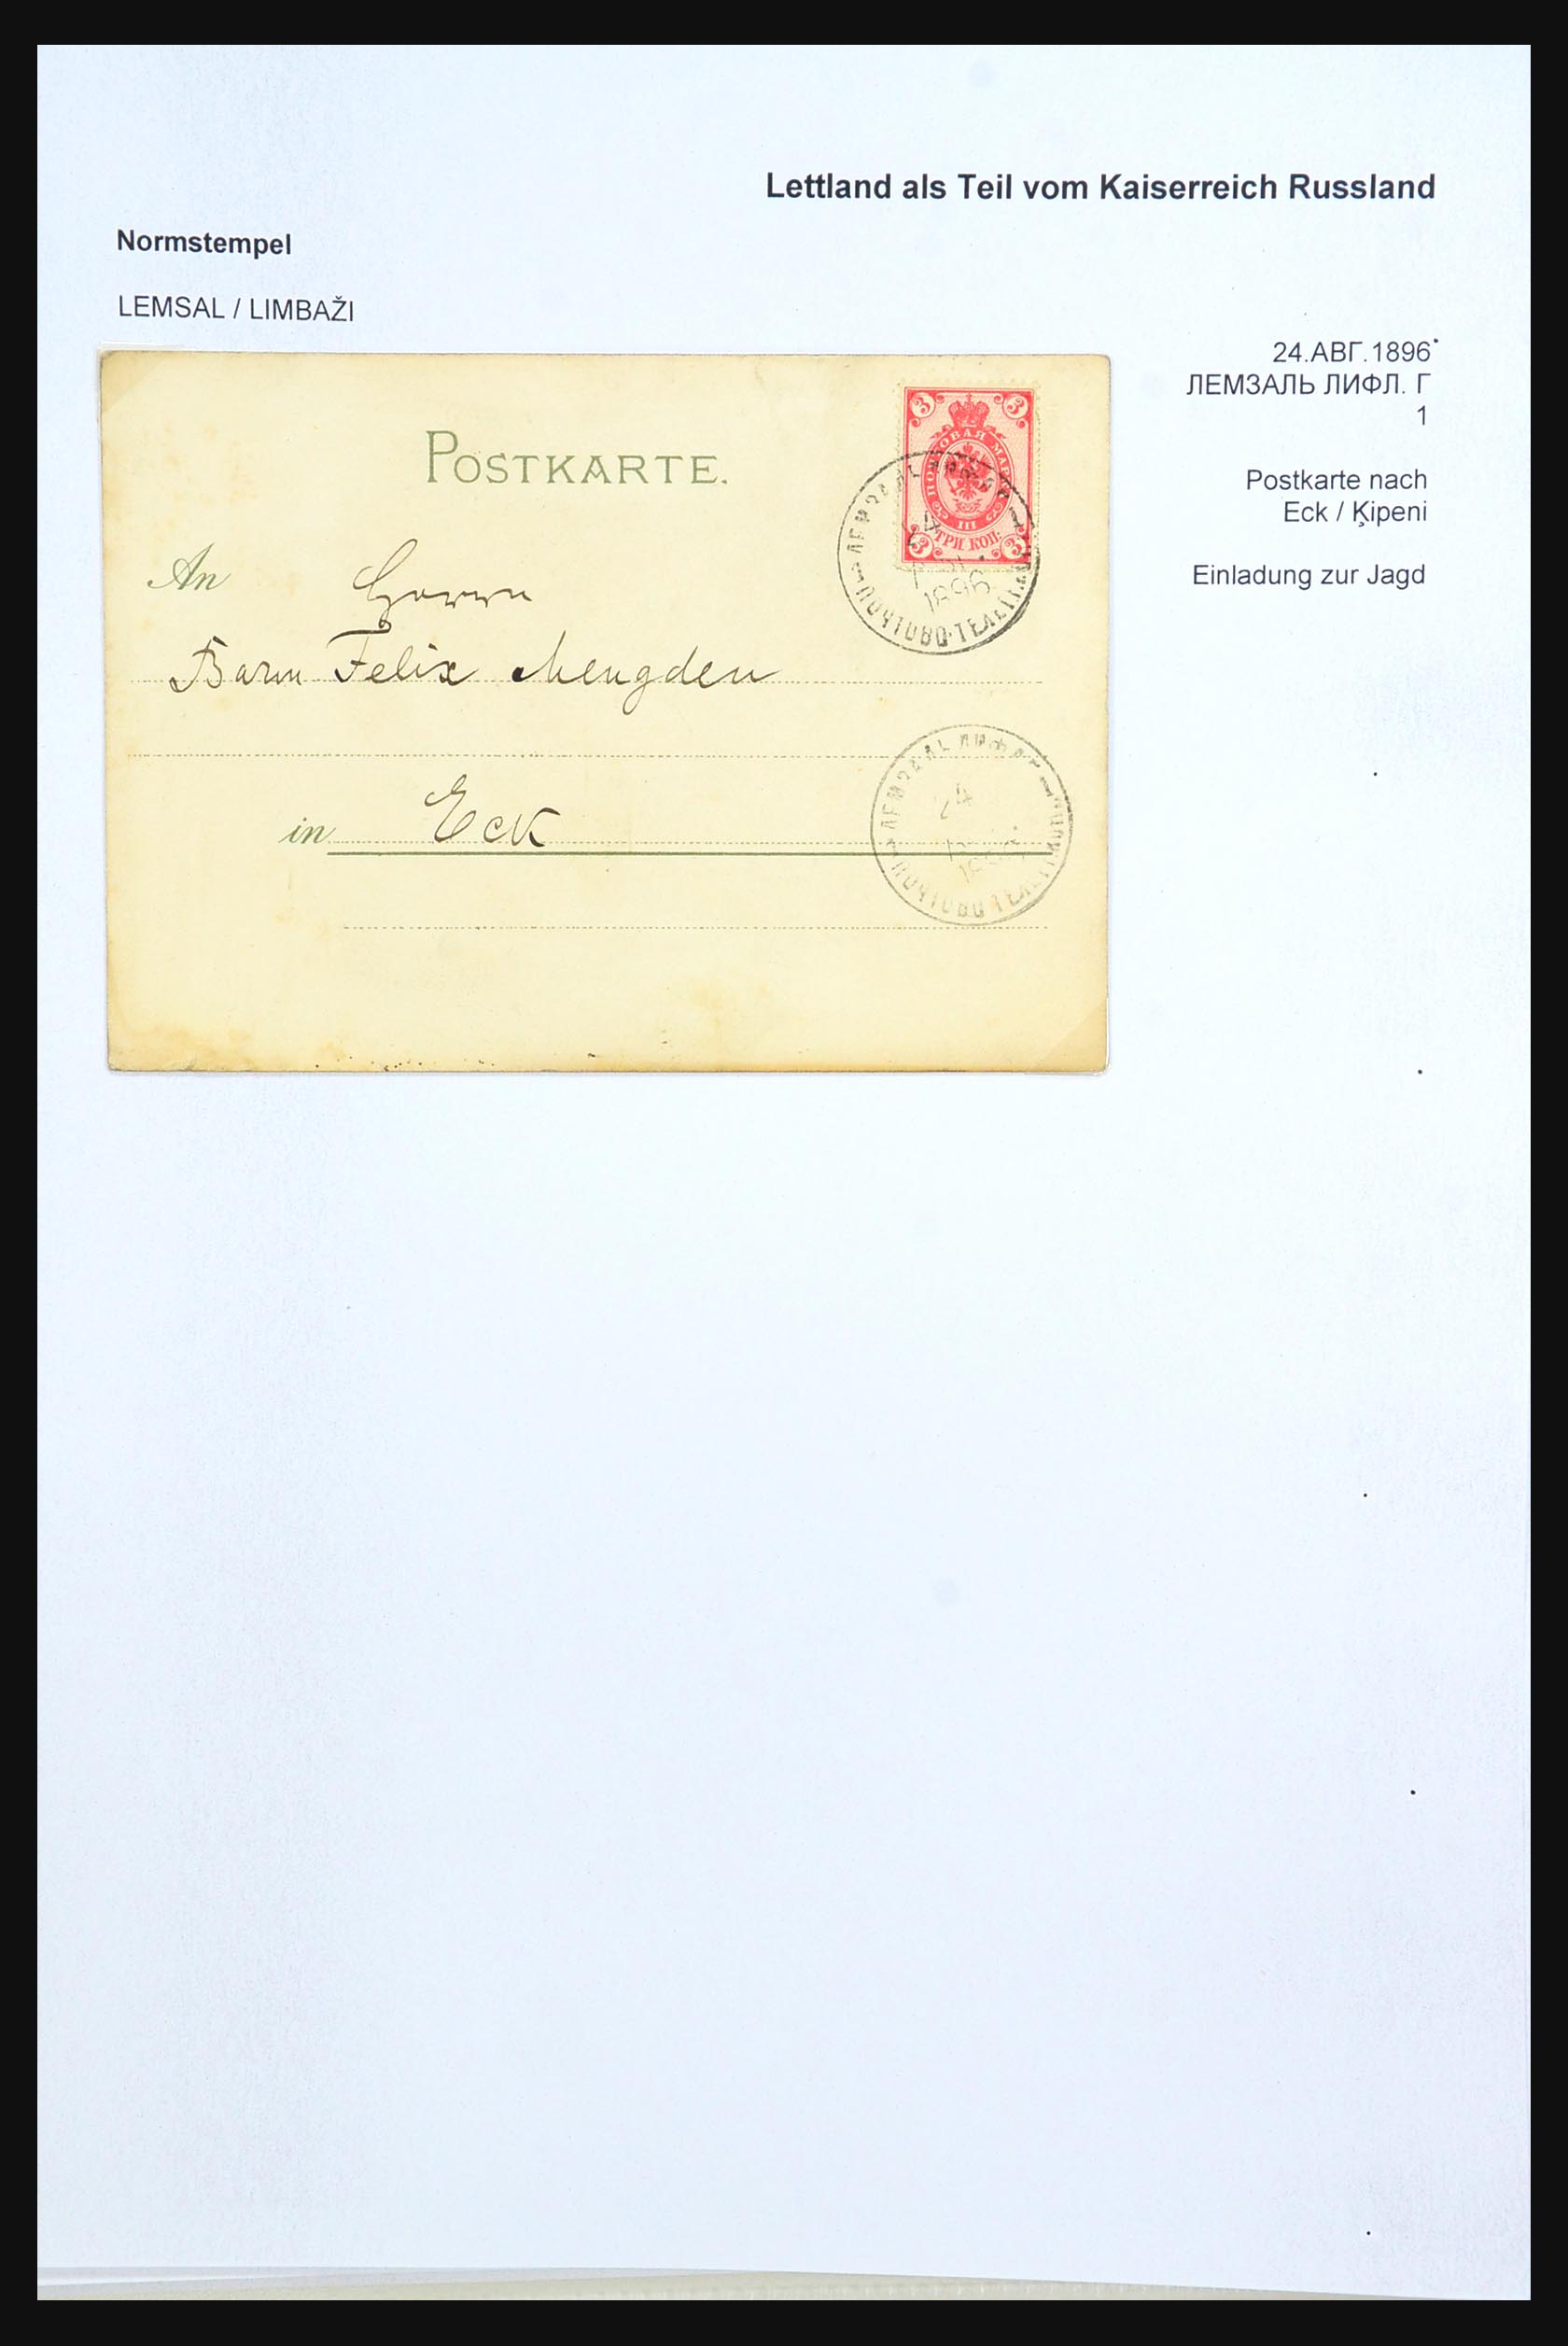 31305 083 - 31305 Latvia as part of Russia 1817-1918.